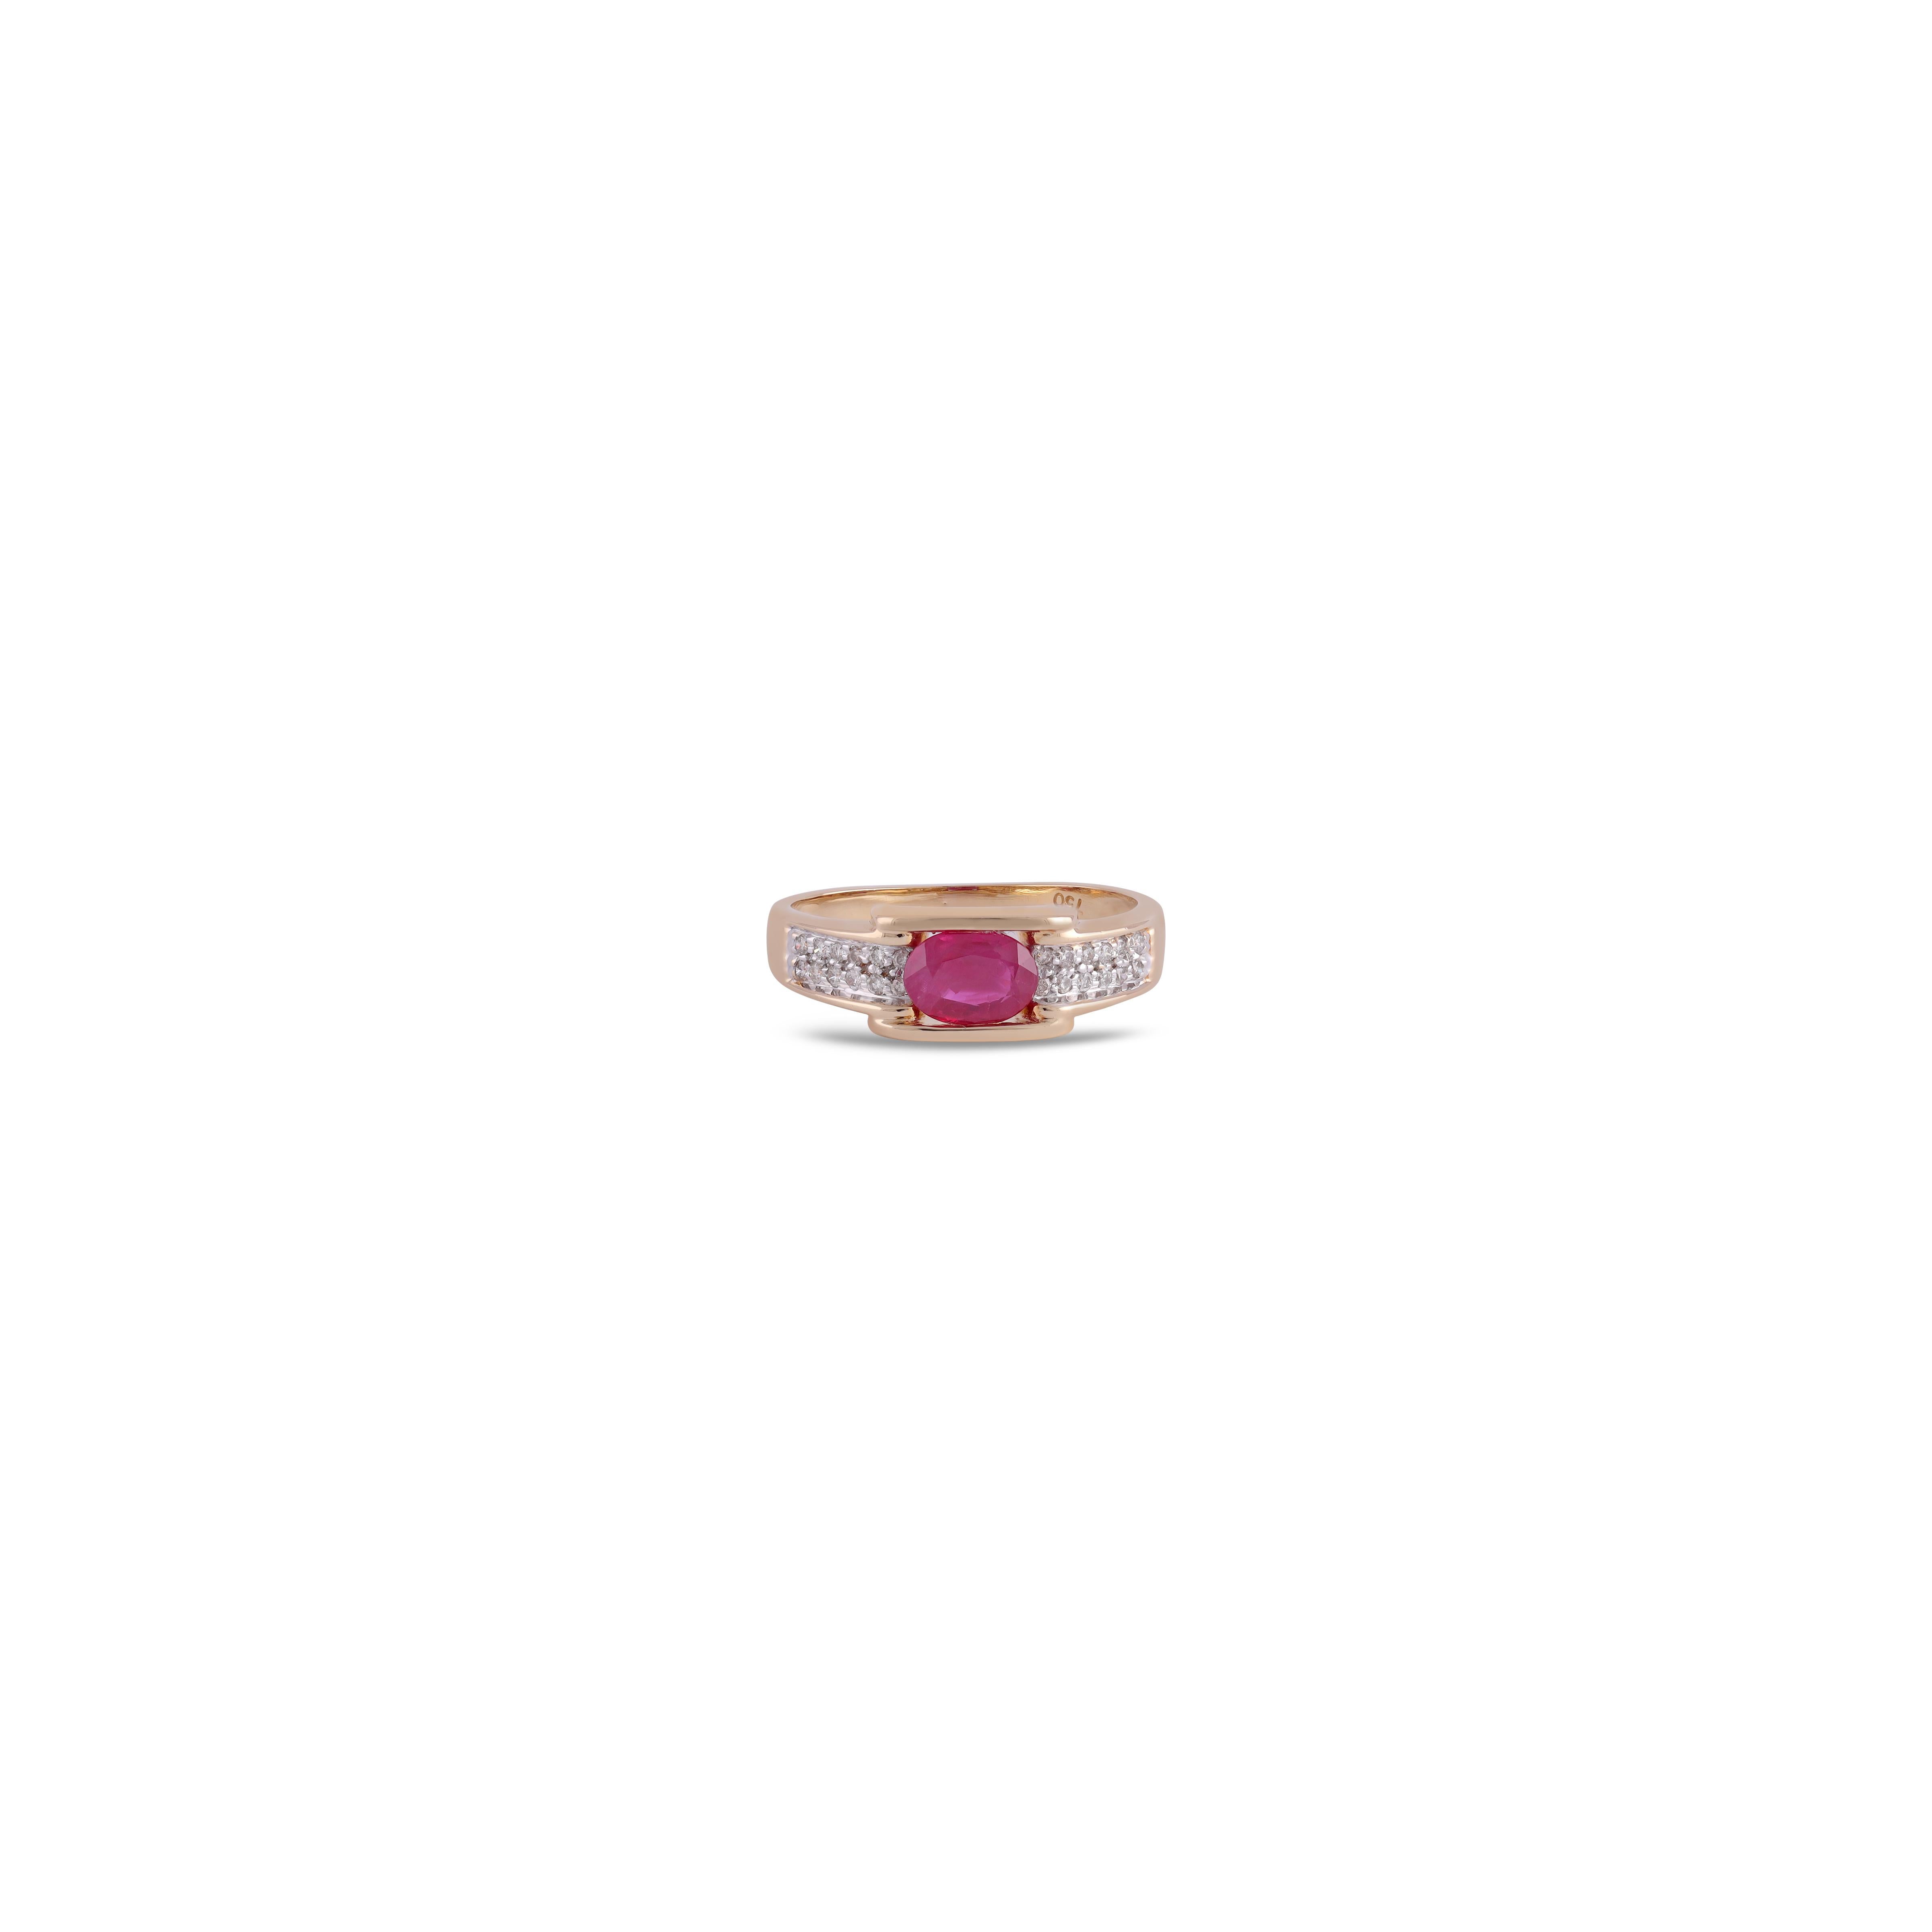 1.05 Carat Mozambique Ruby and Diamond  Ring in 18k Gold


Apart of our carefully curated collection, this ring proudly displays a 1.05 carat Mozambique ruby crowning a 18k  Matte Finish Yellow Gold. The ruby's prongs hold the stone tightly but